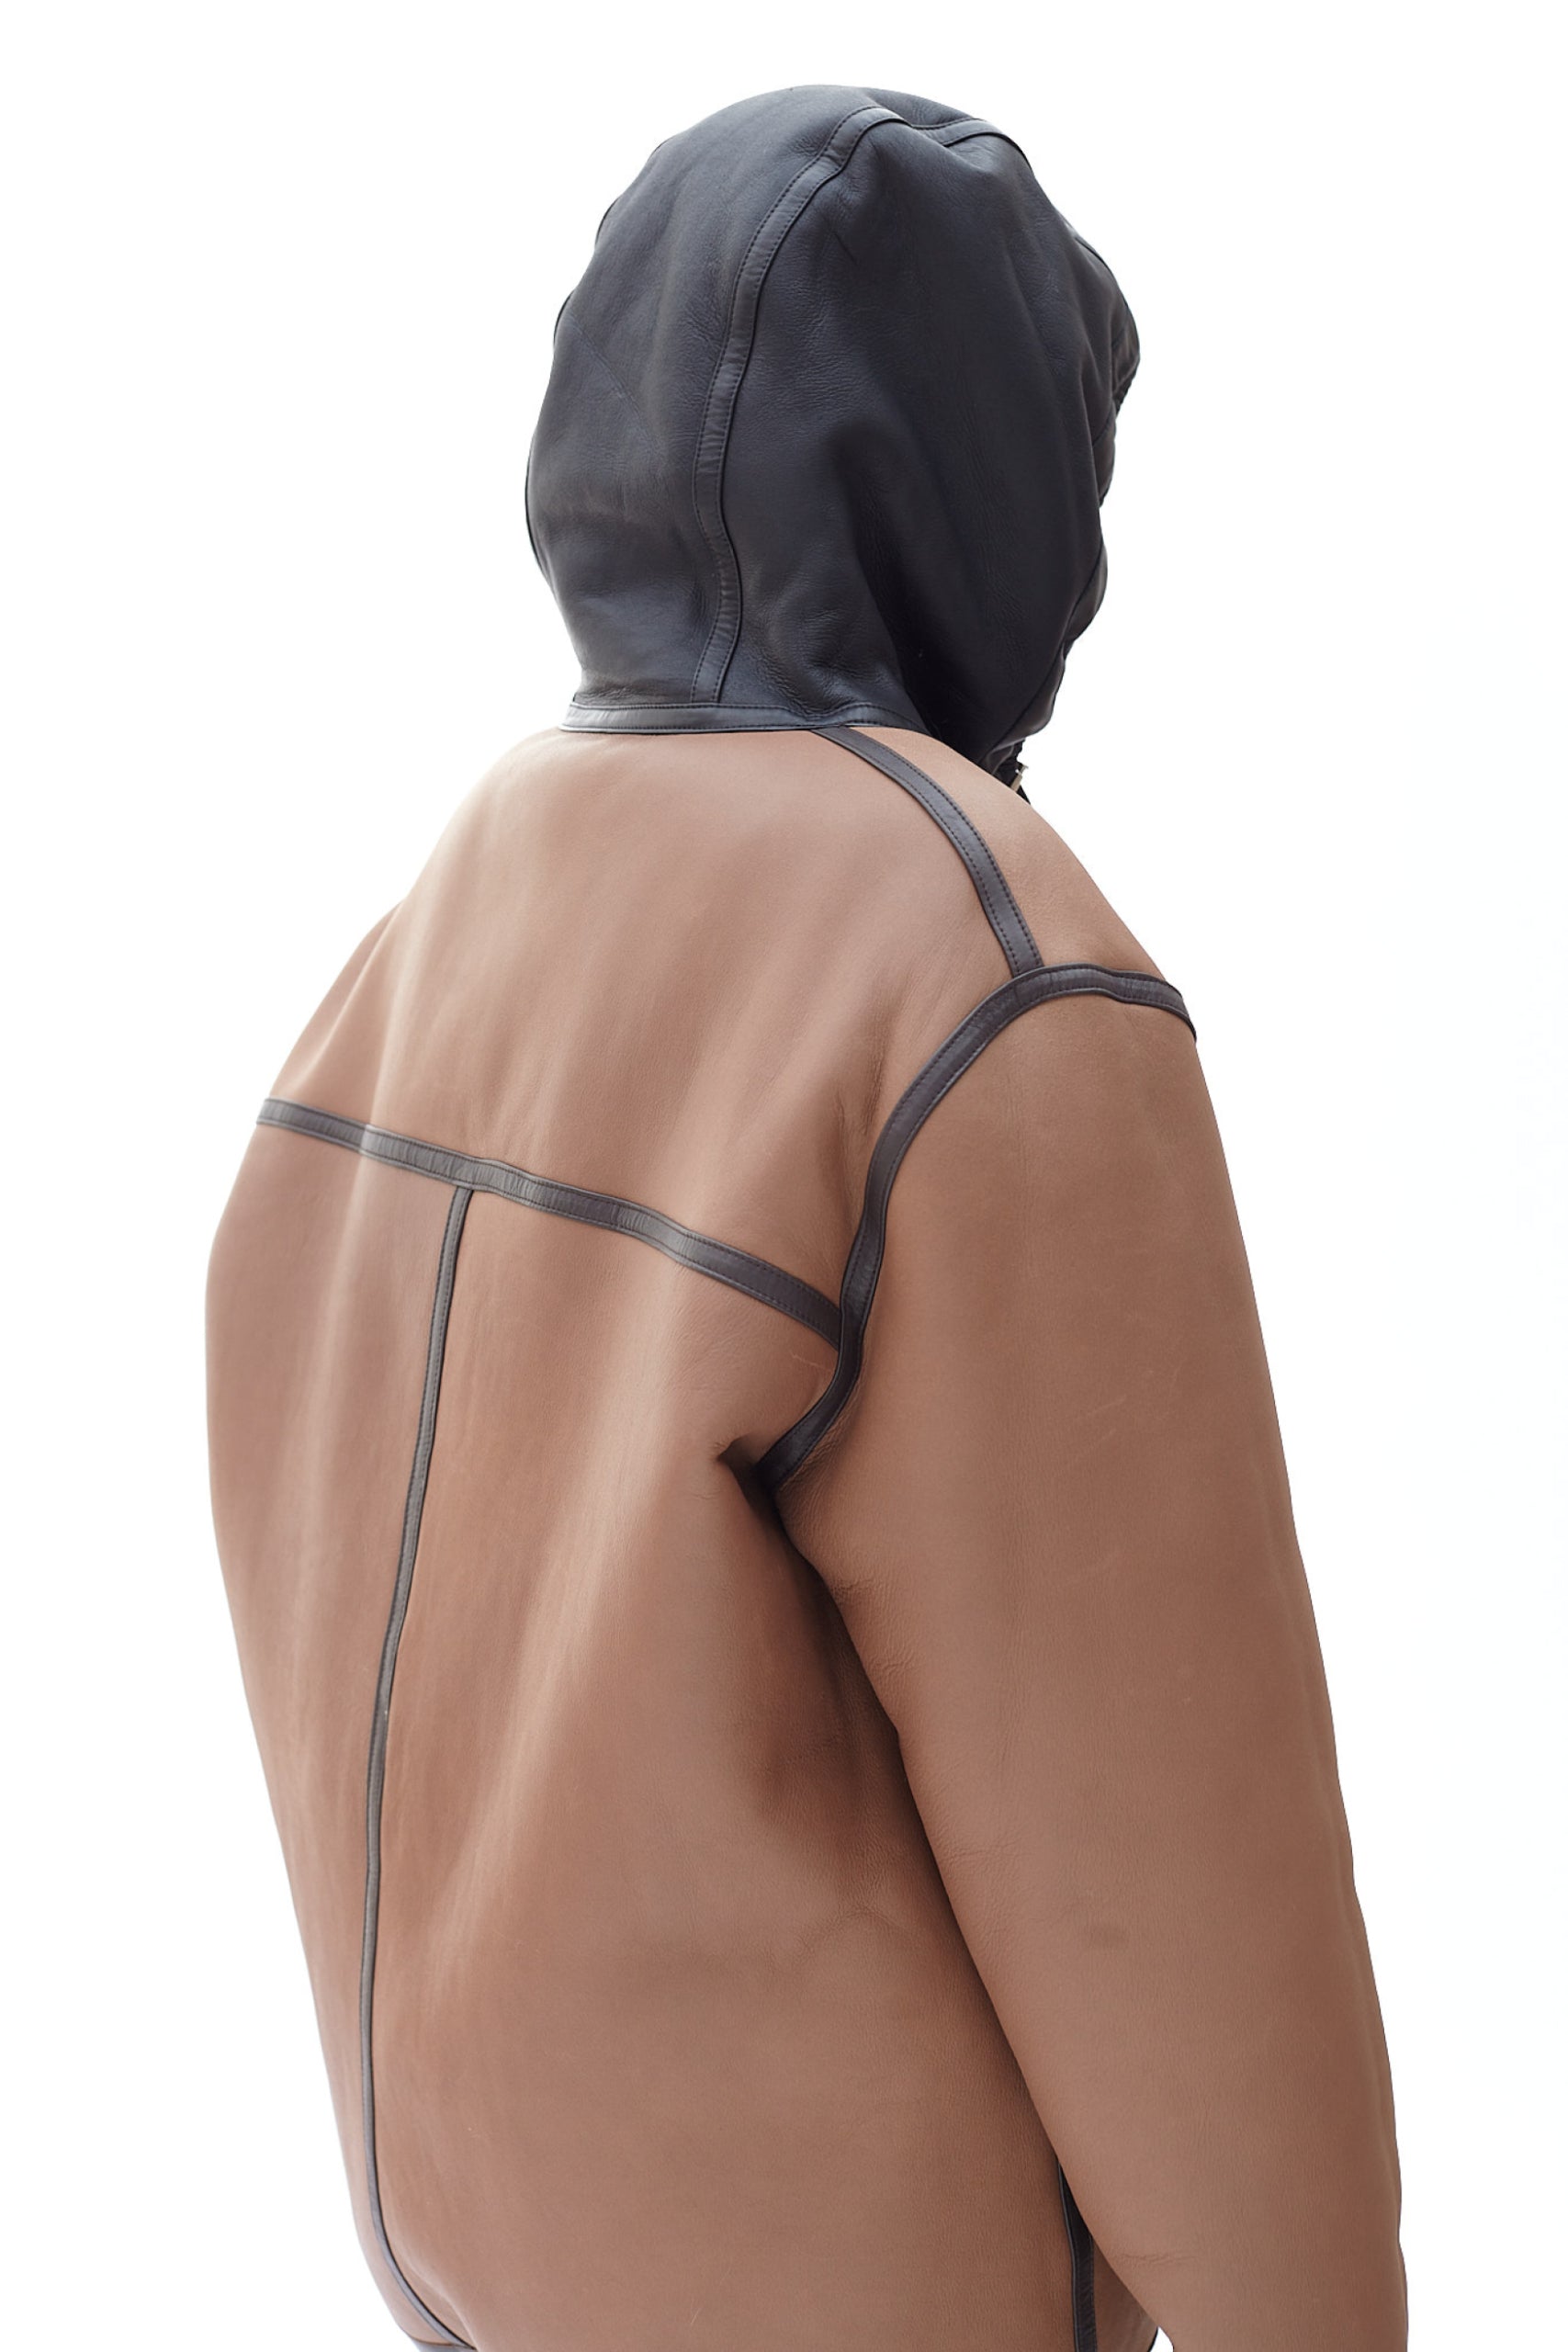 Load image into Gallery viewer, Reversible Sheepskin Jacket With Contrast Hood